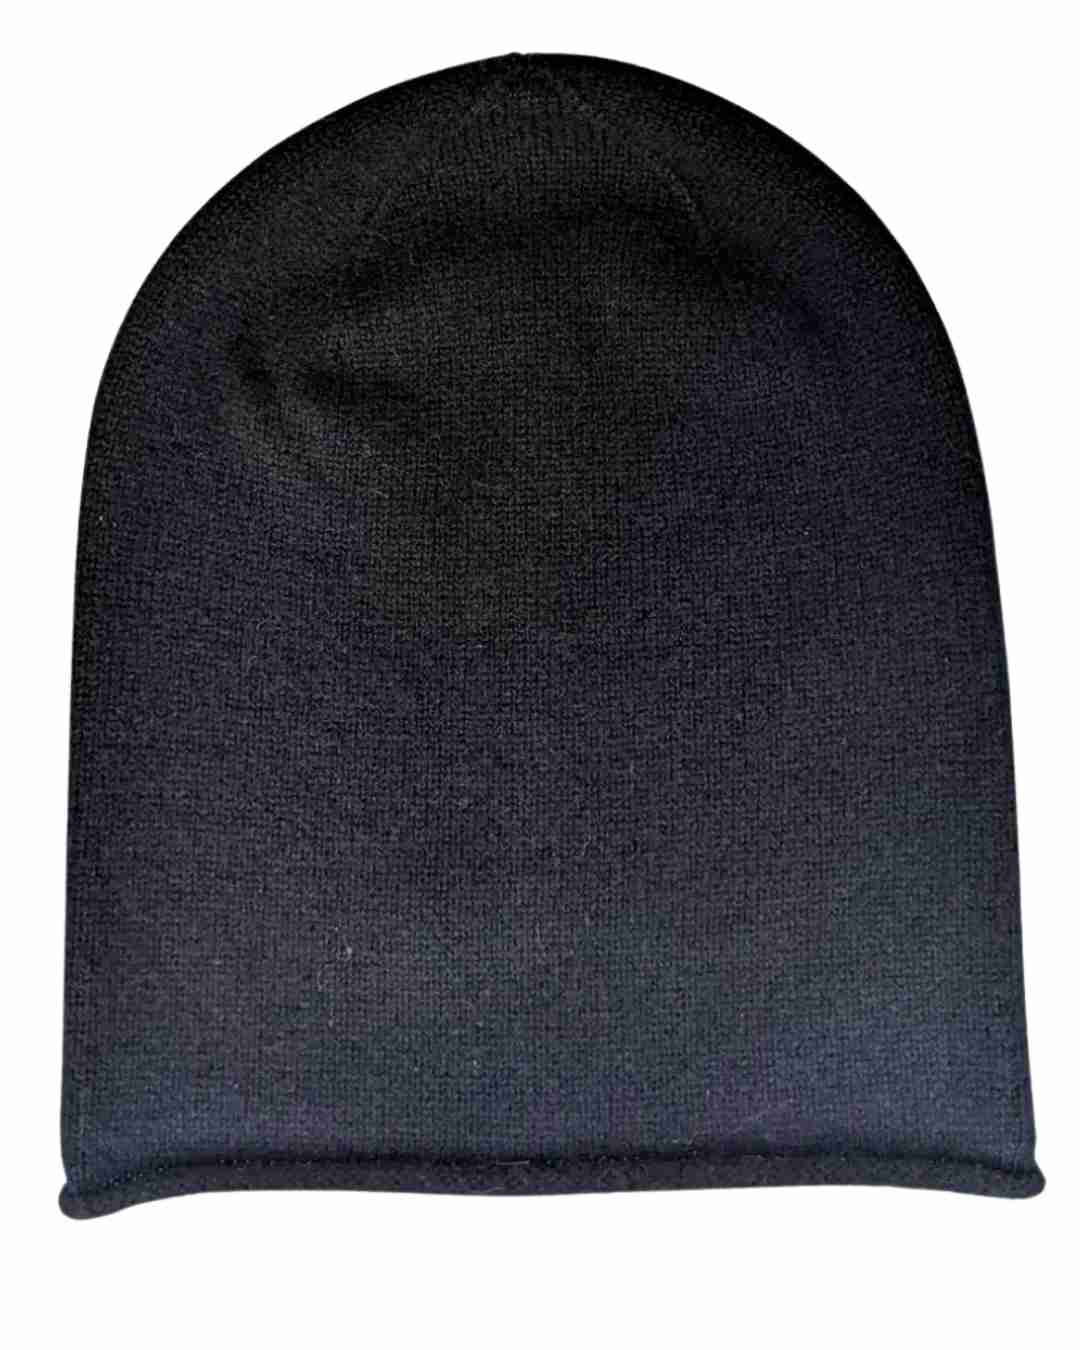 black hat made with pure cashmere, designed in Ireland